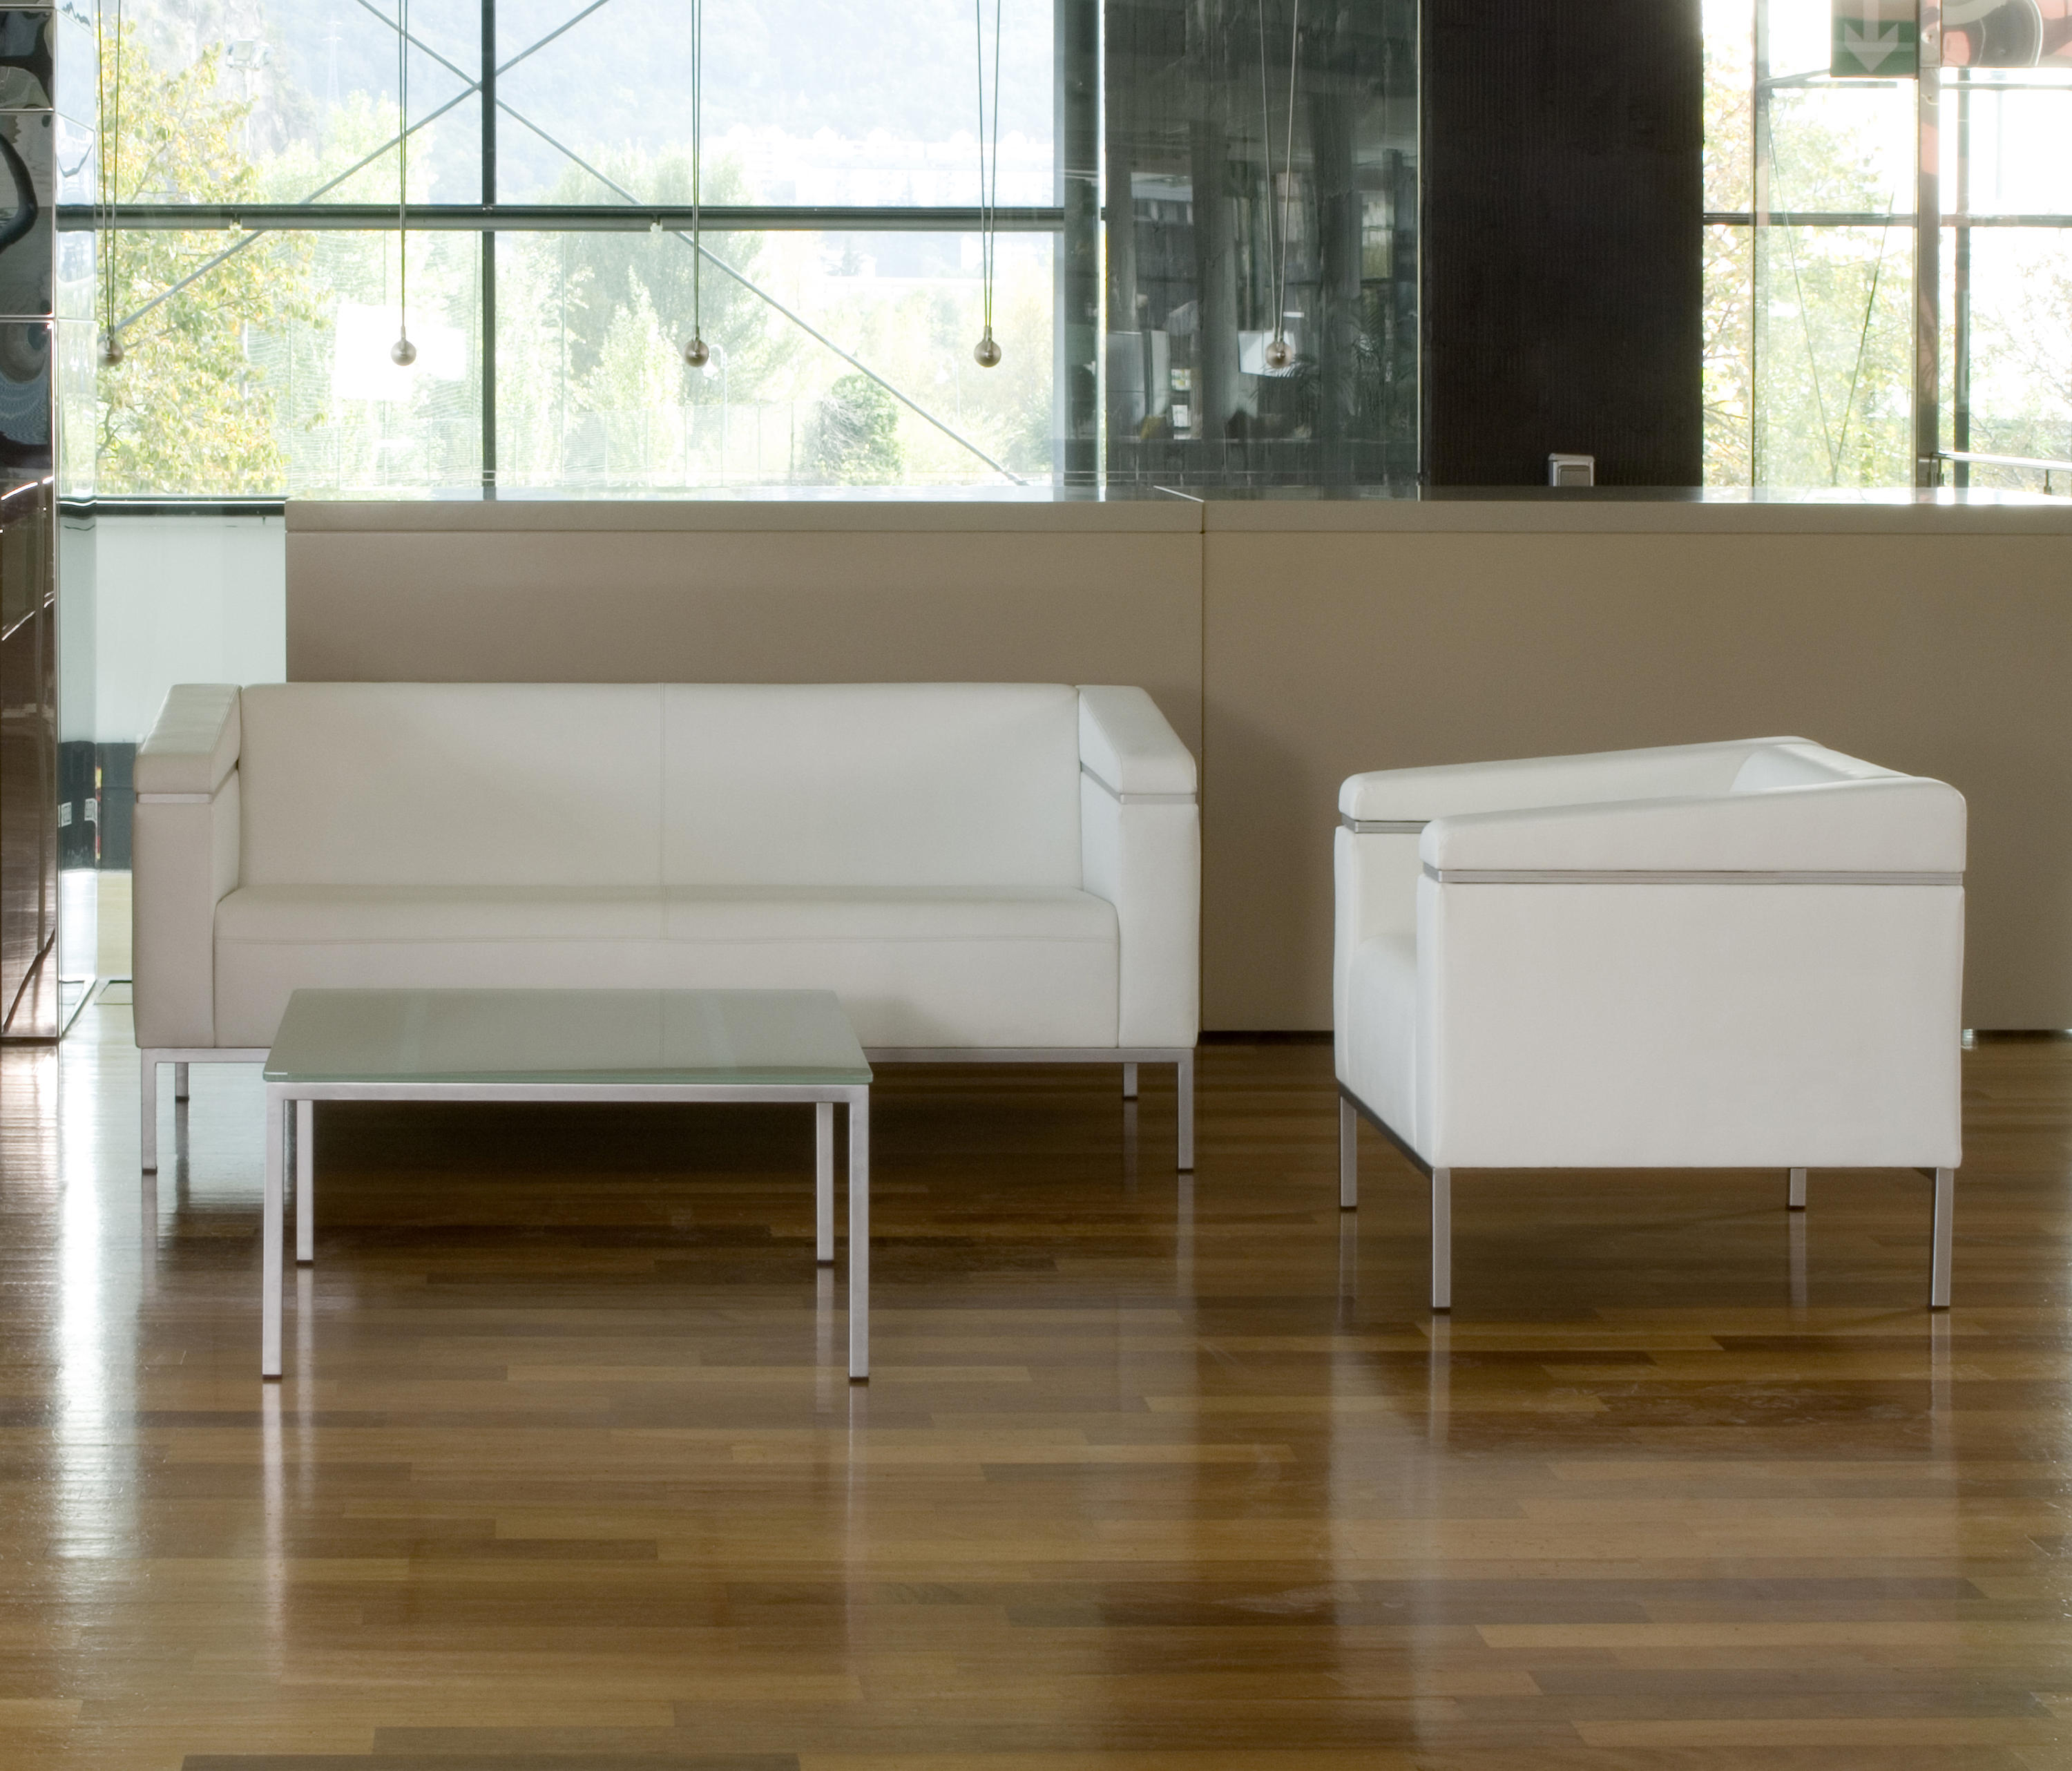 P@D - Lounge-work seating from Rossin | Architonic